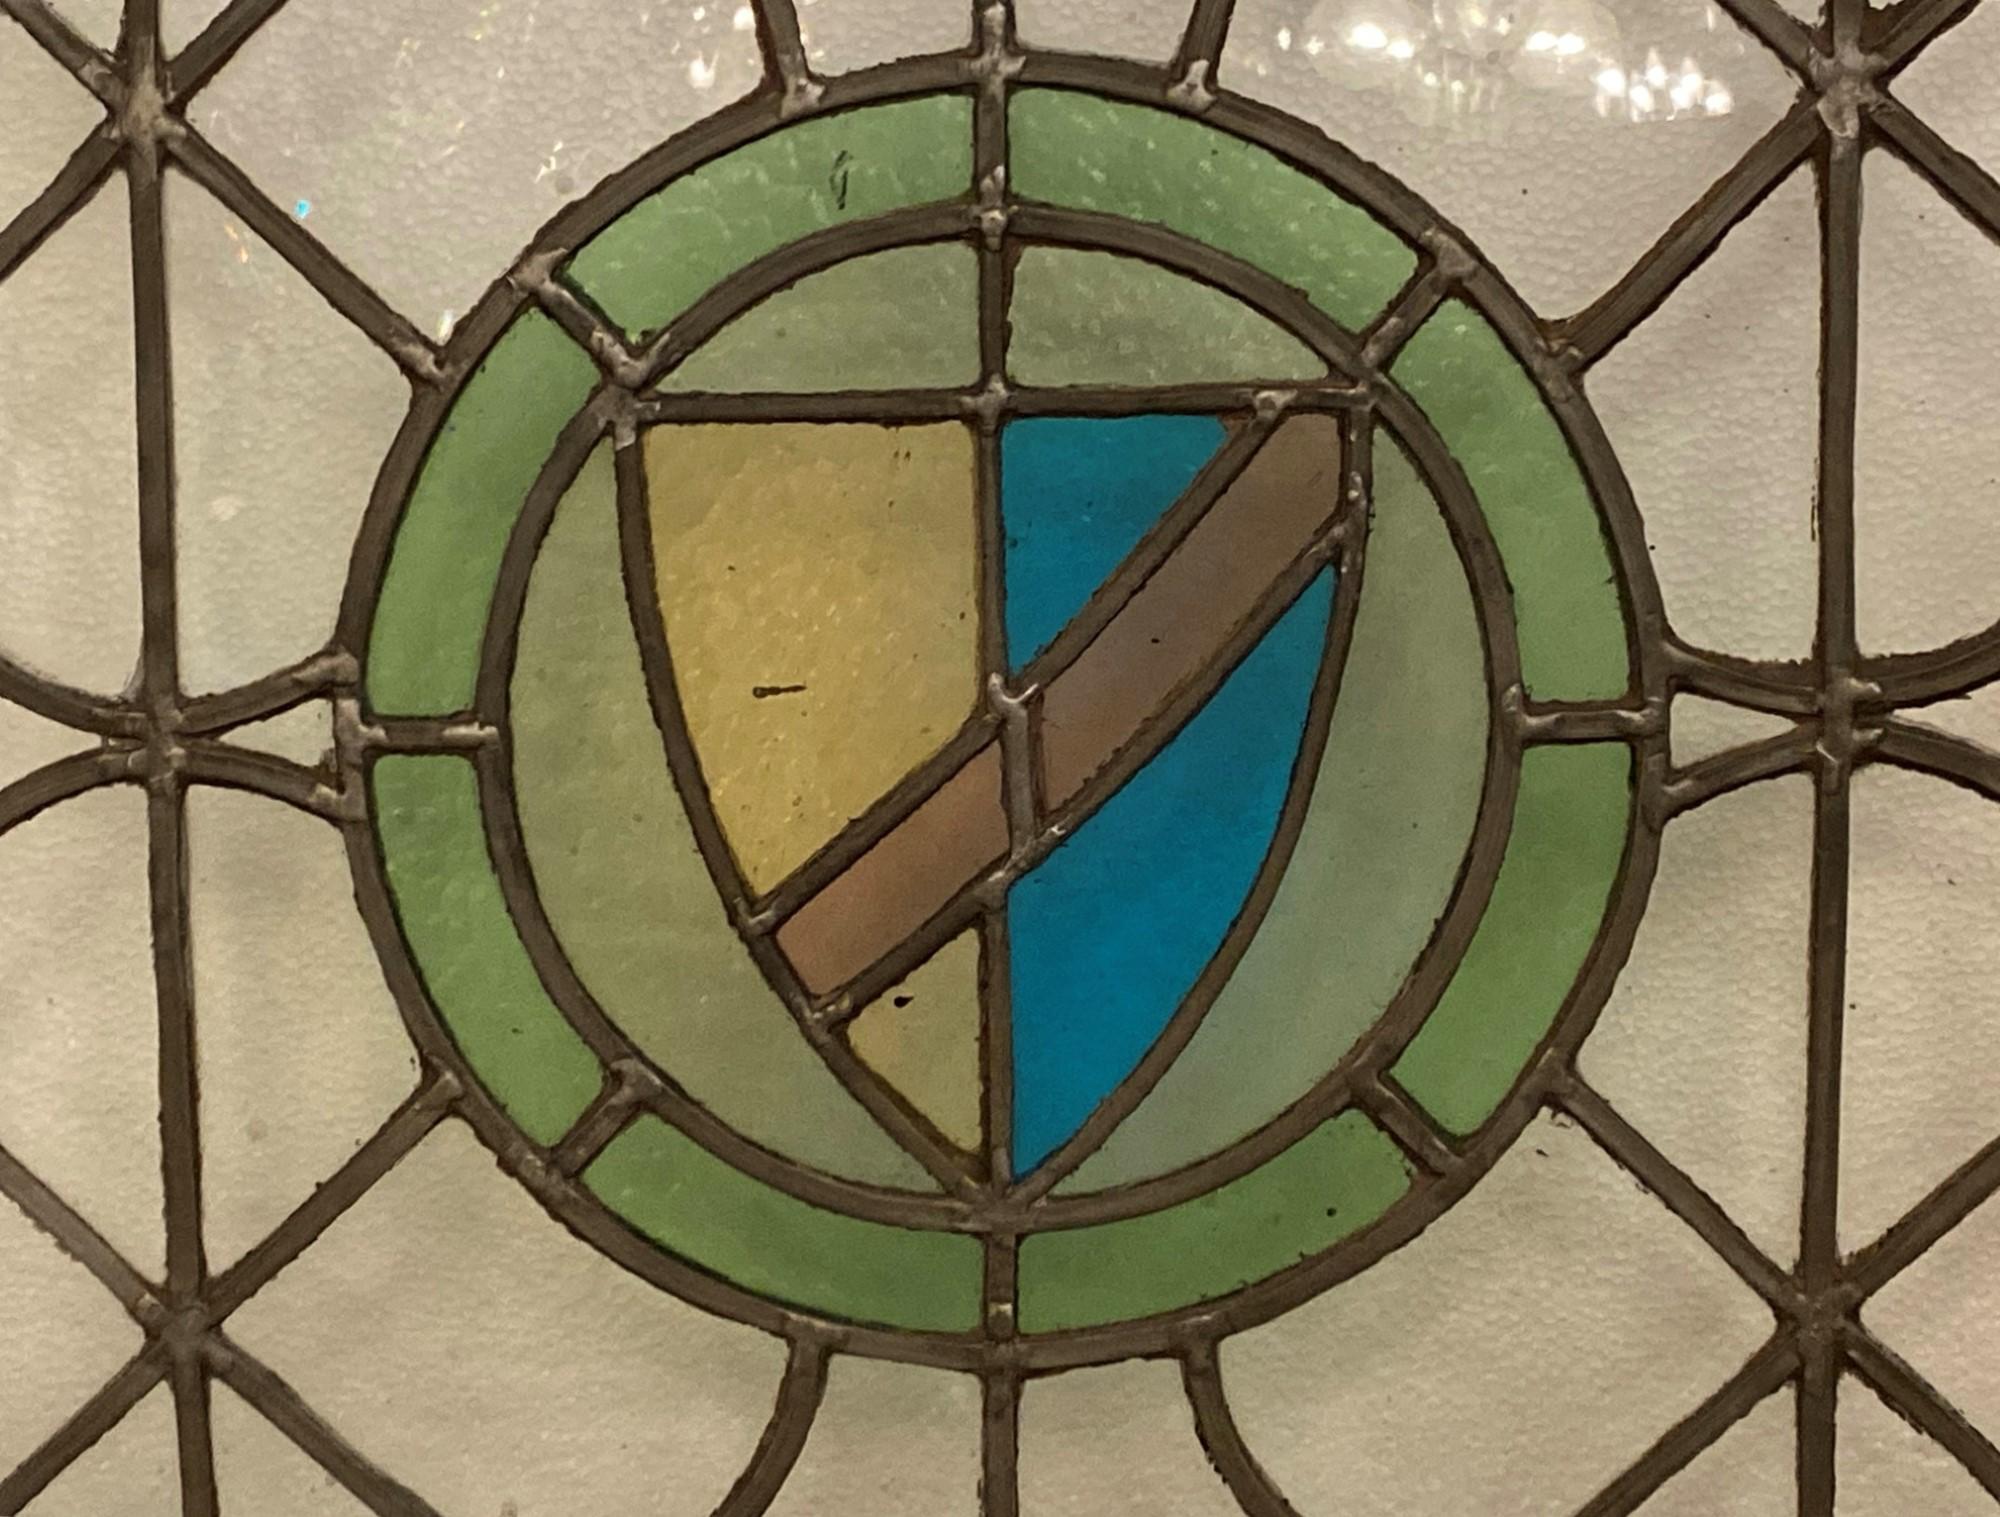 20th Century Early 20th C. Leaded Stained Glass Window with a Quatrefoil and Shield Motif